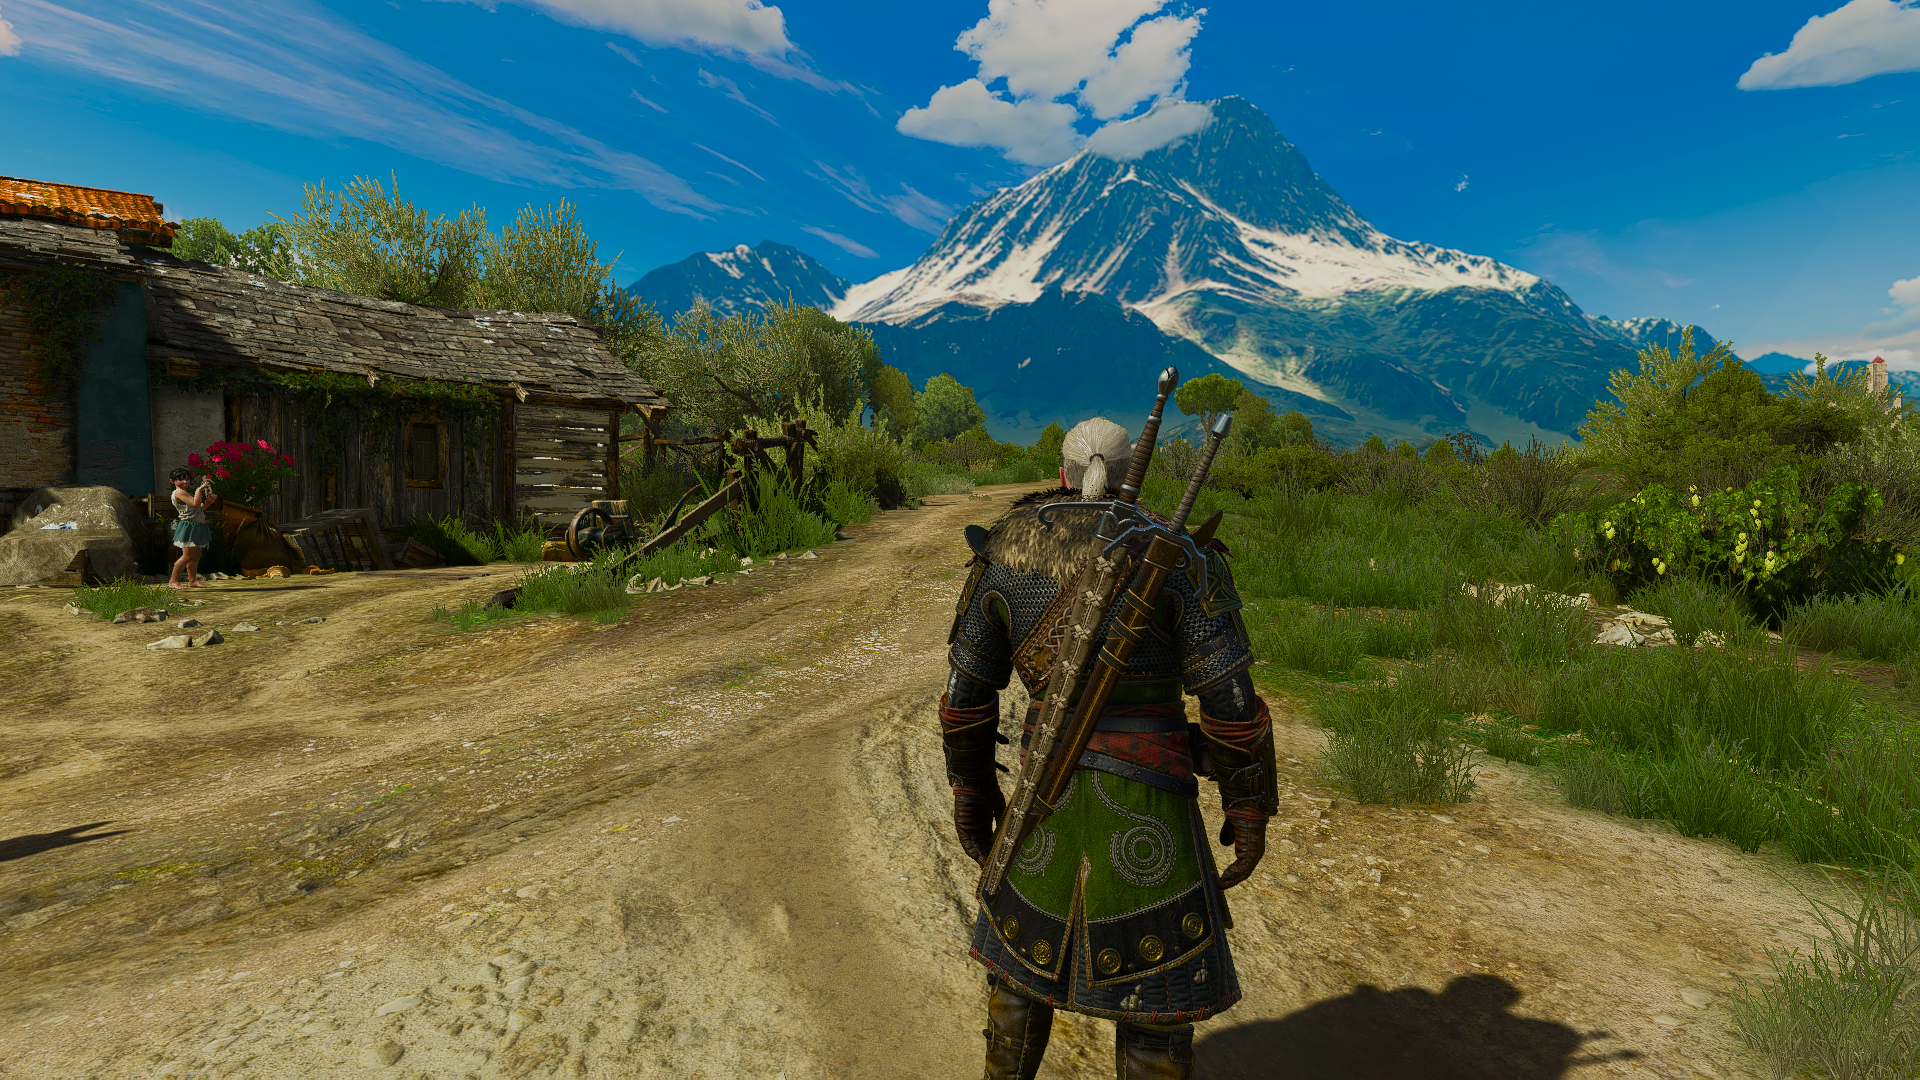 General 1920x1080 The Witcher 3: Wild Hunt The Witcher video game landscape video games RPG PC gaming screen shot